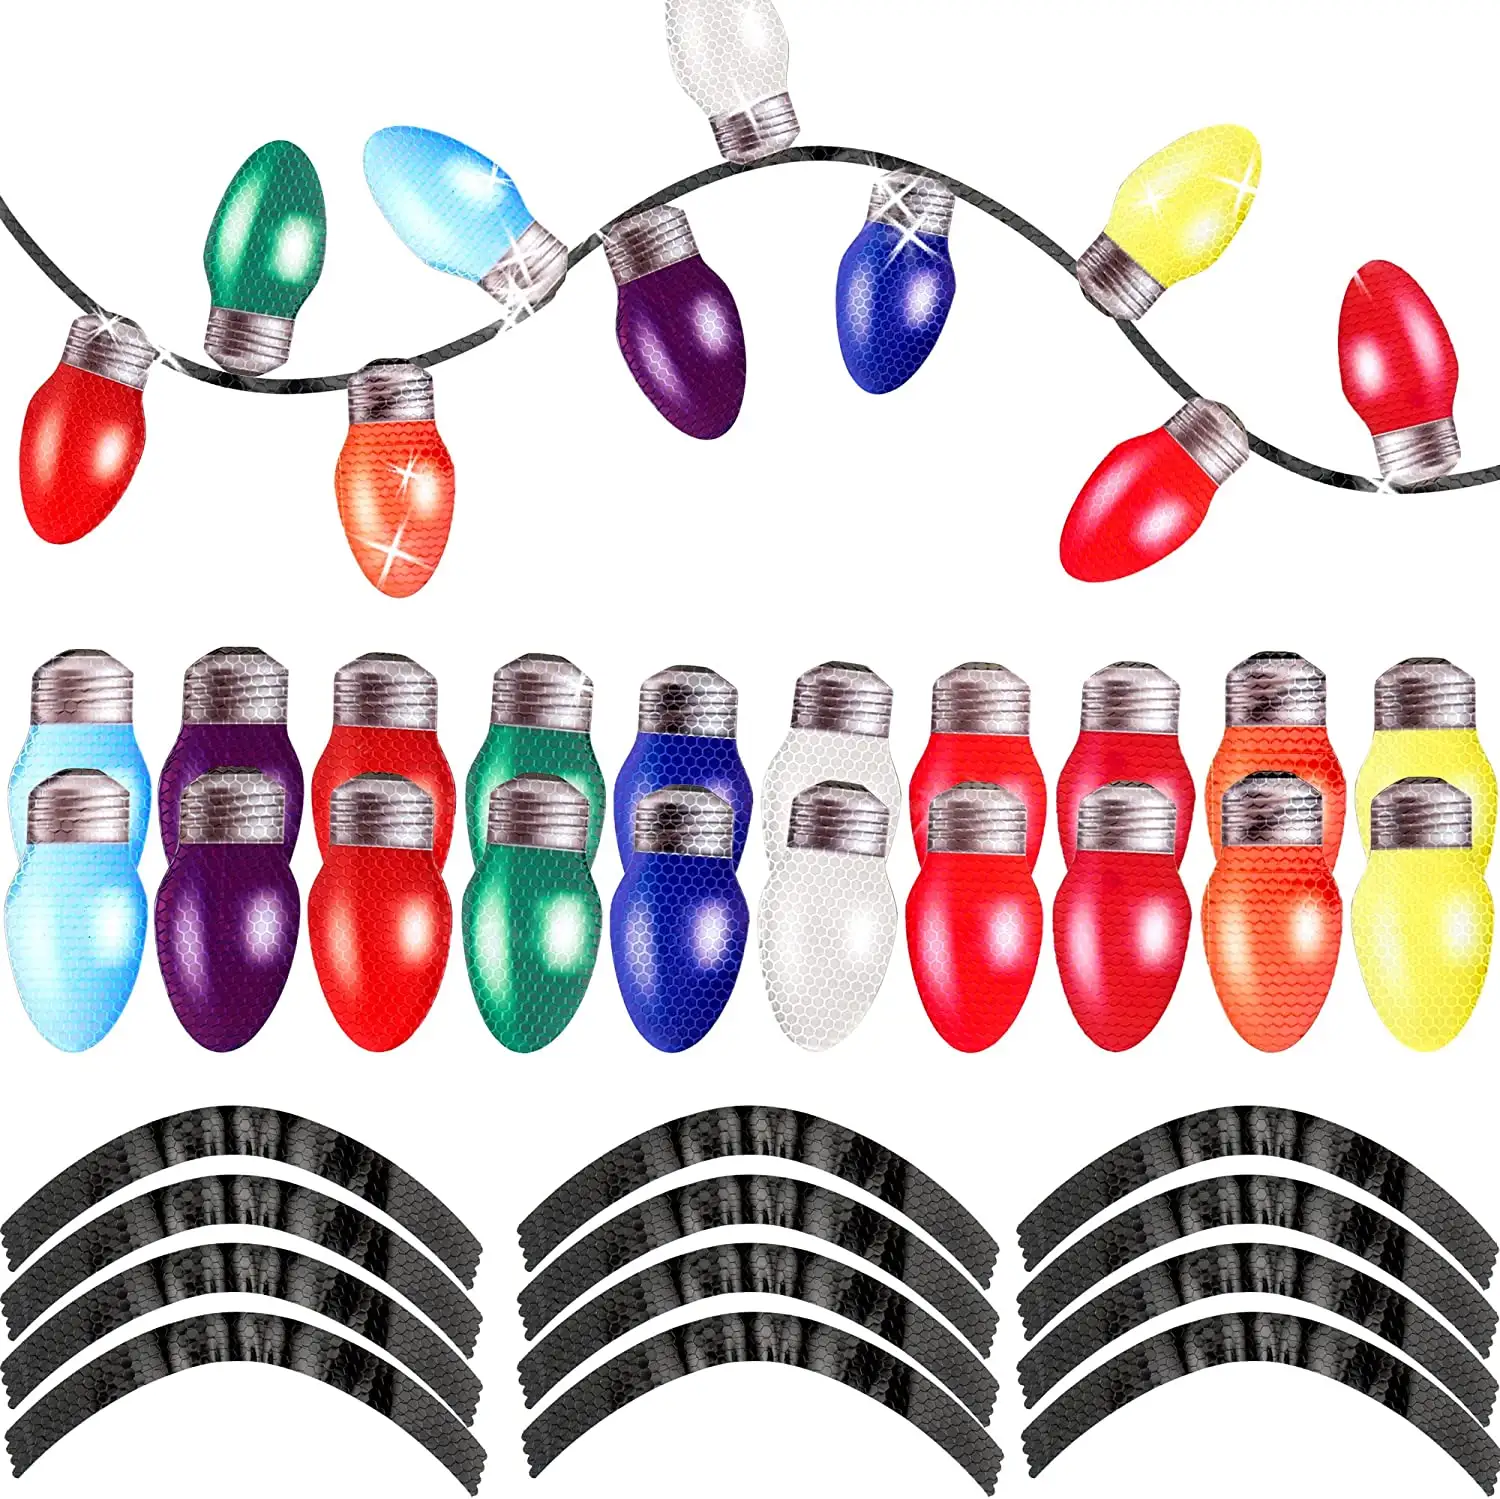 Custom Reflective Automotive Christmas Lights Magnet, Light Bulb Shaped Festive Car Magnets for Cars or Any Metal Surface